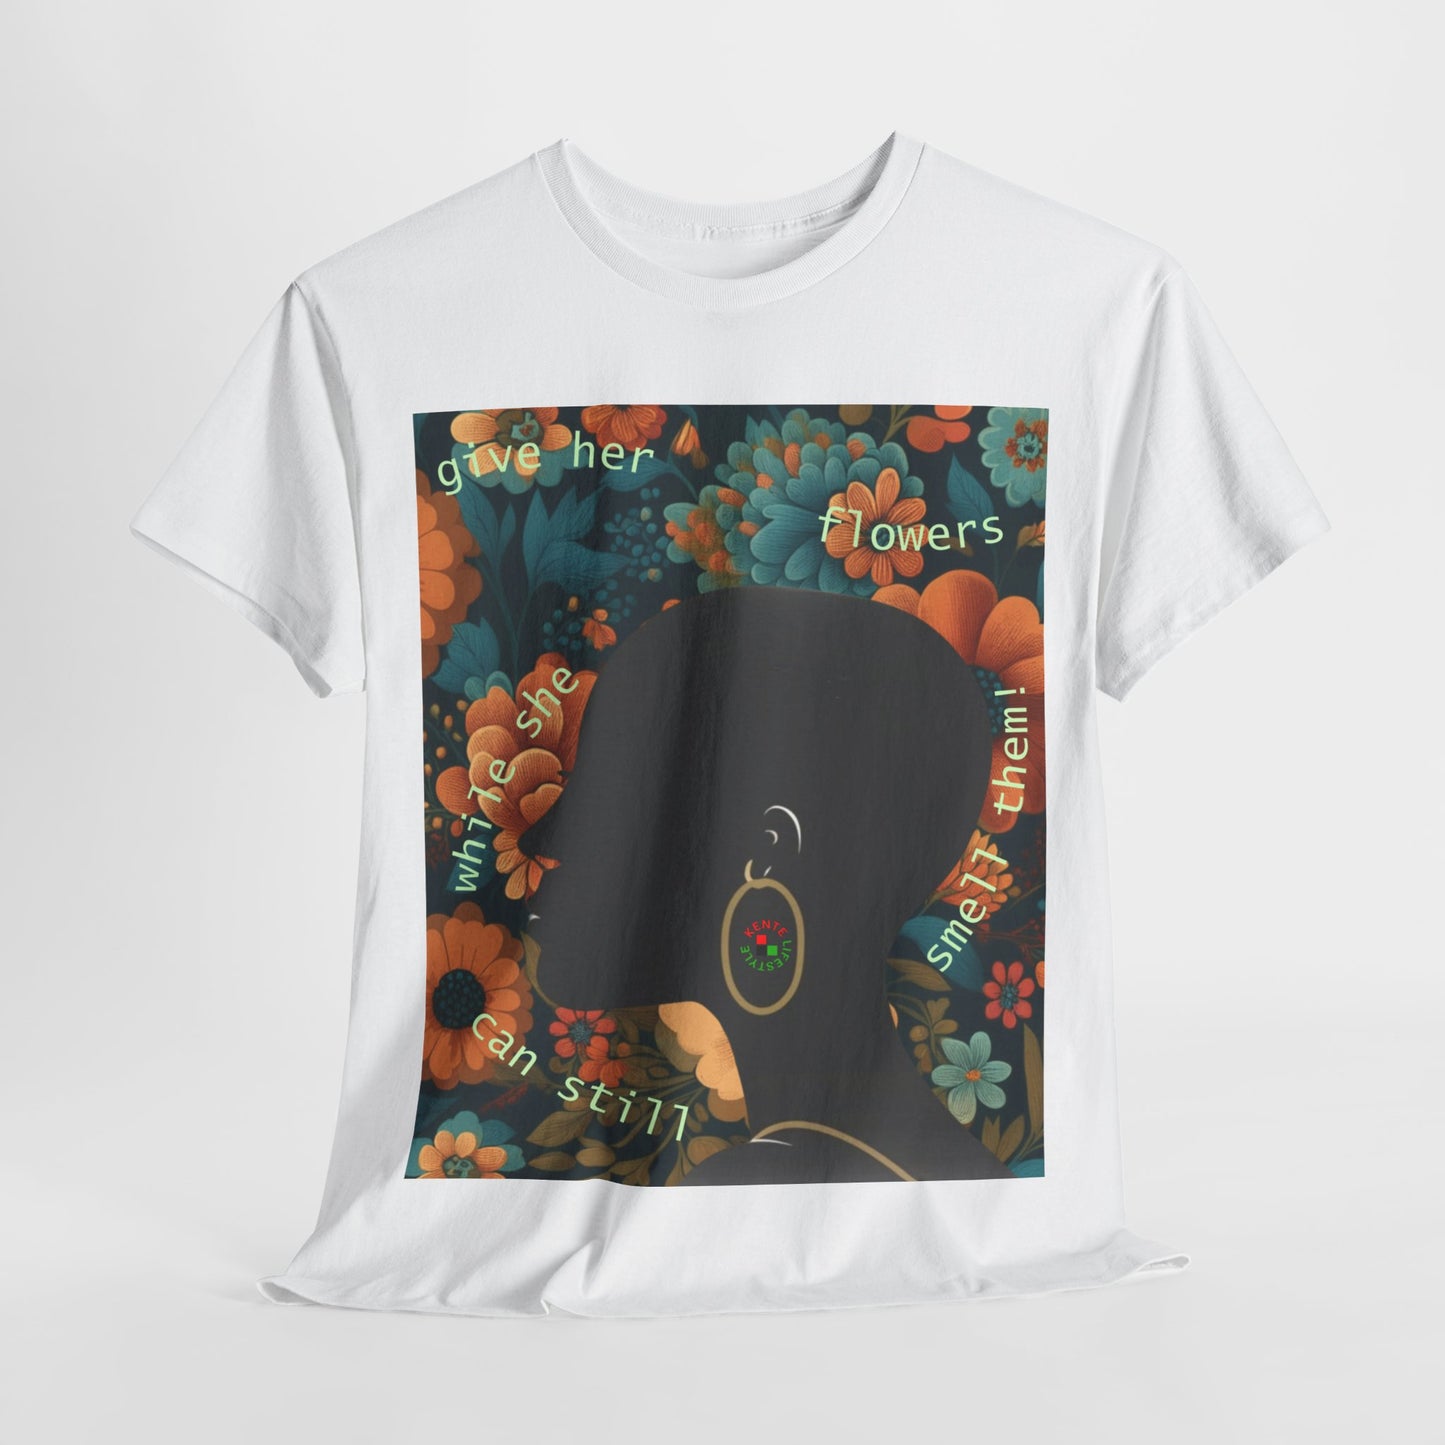 Give her flowers..." T-shirt